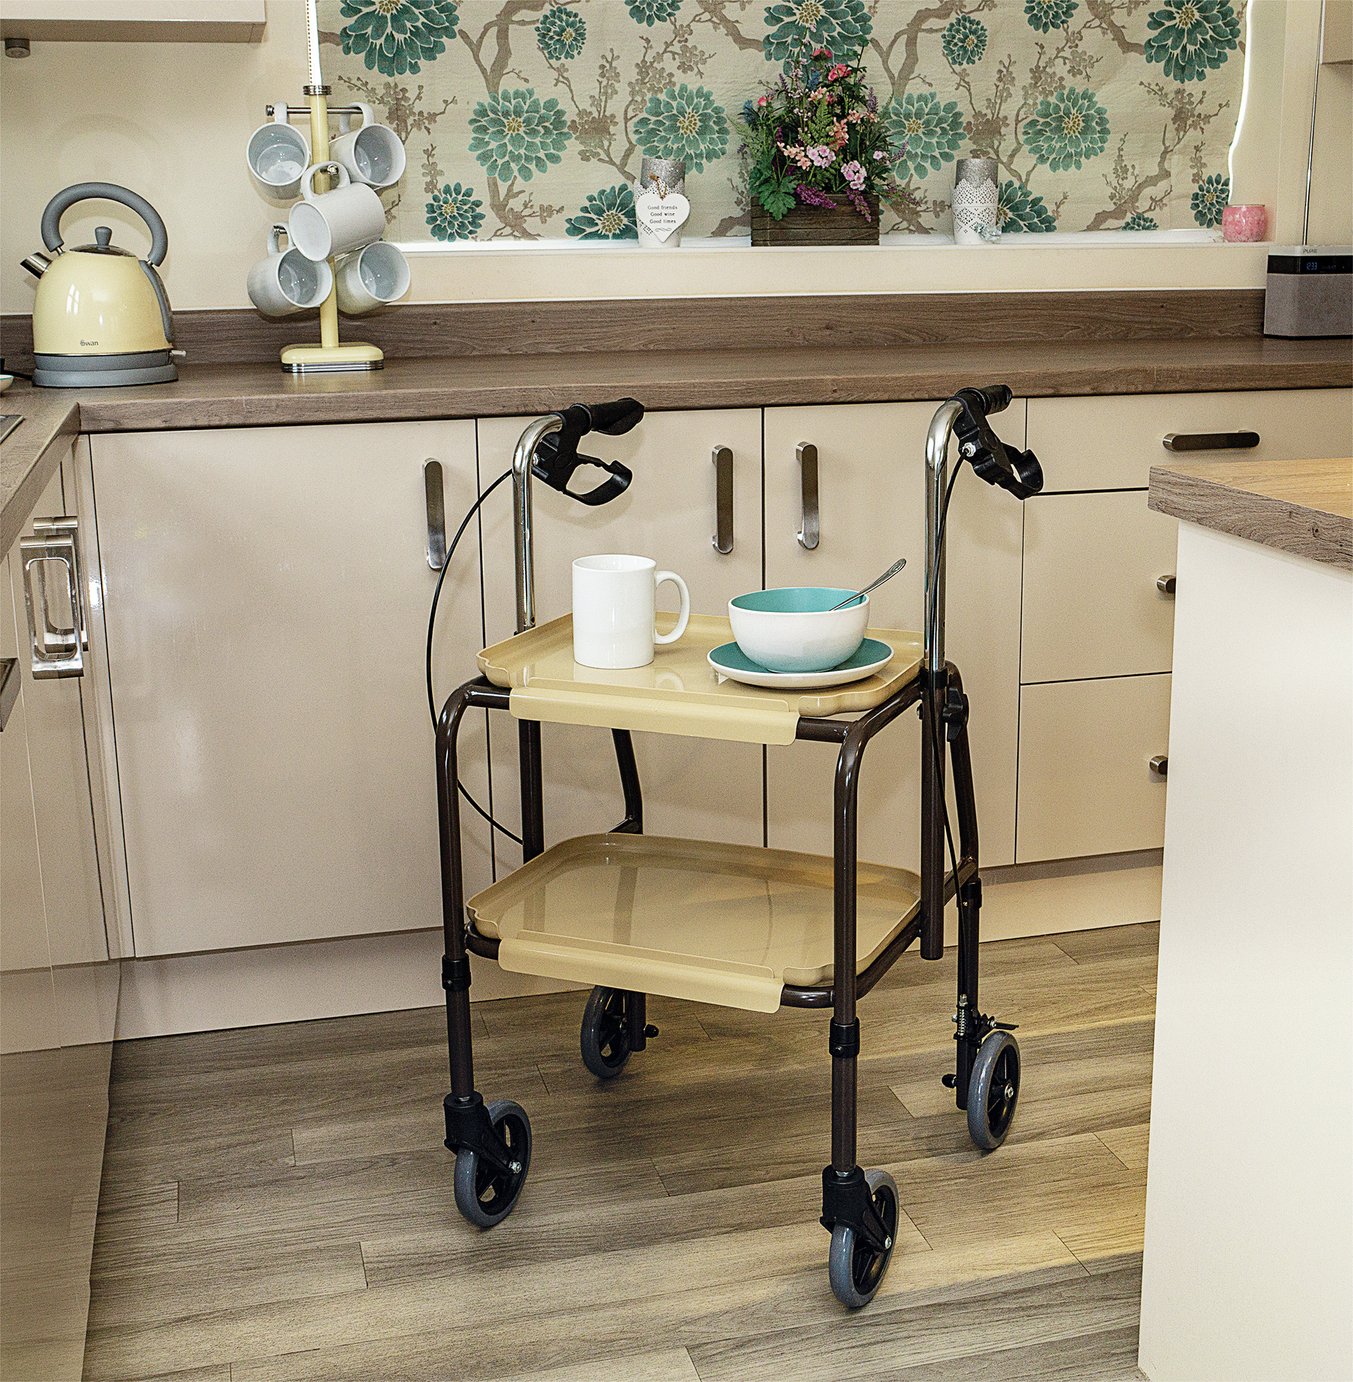 Aidapt Trolley with Brakes Review